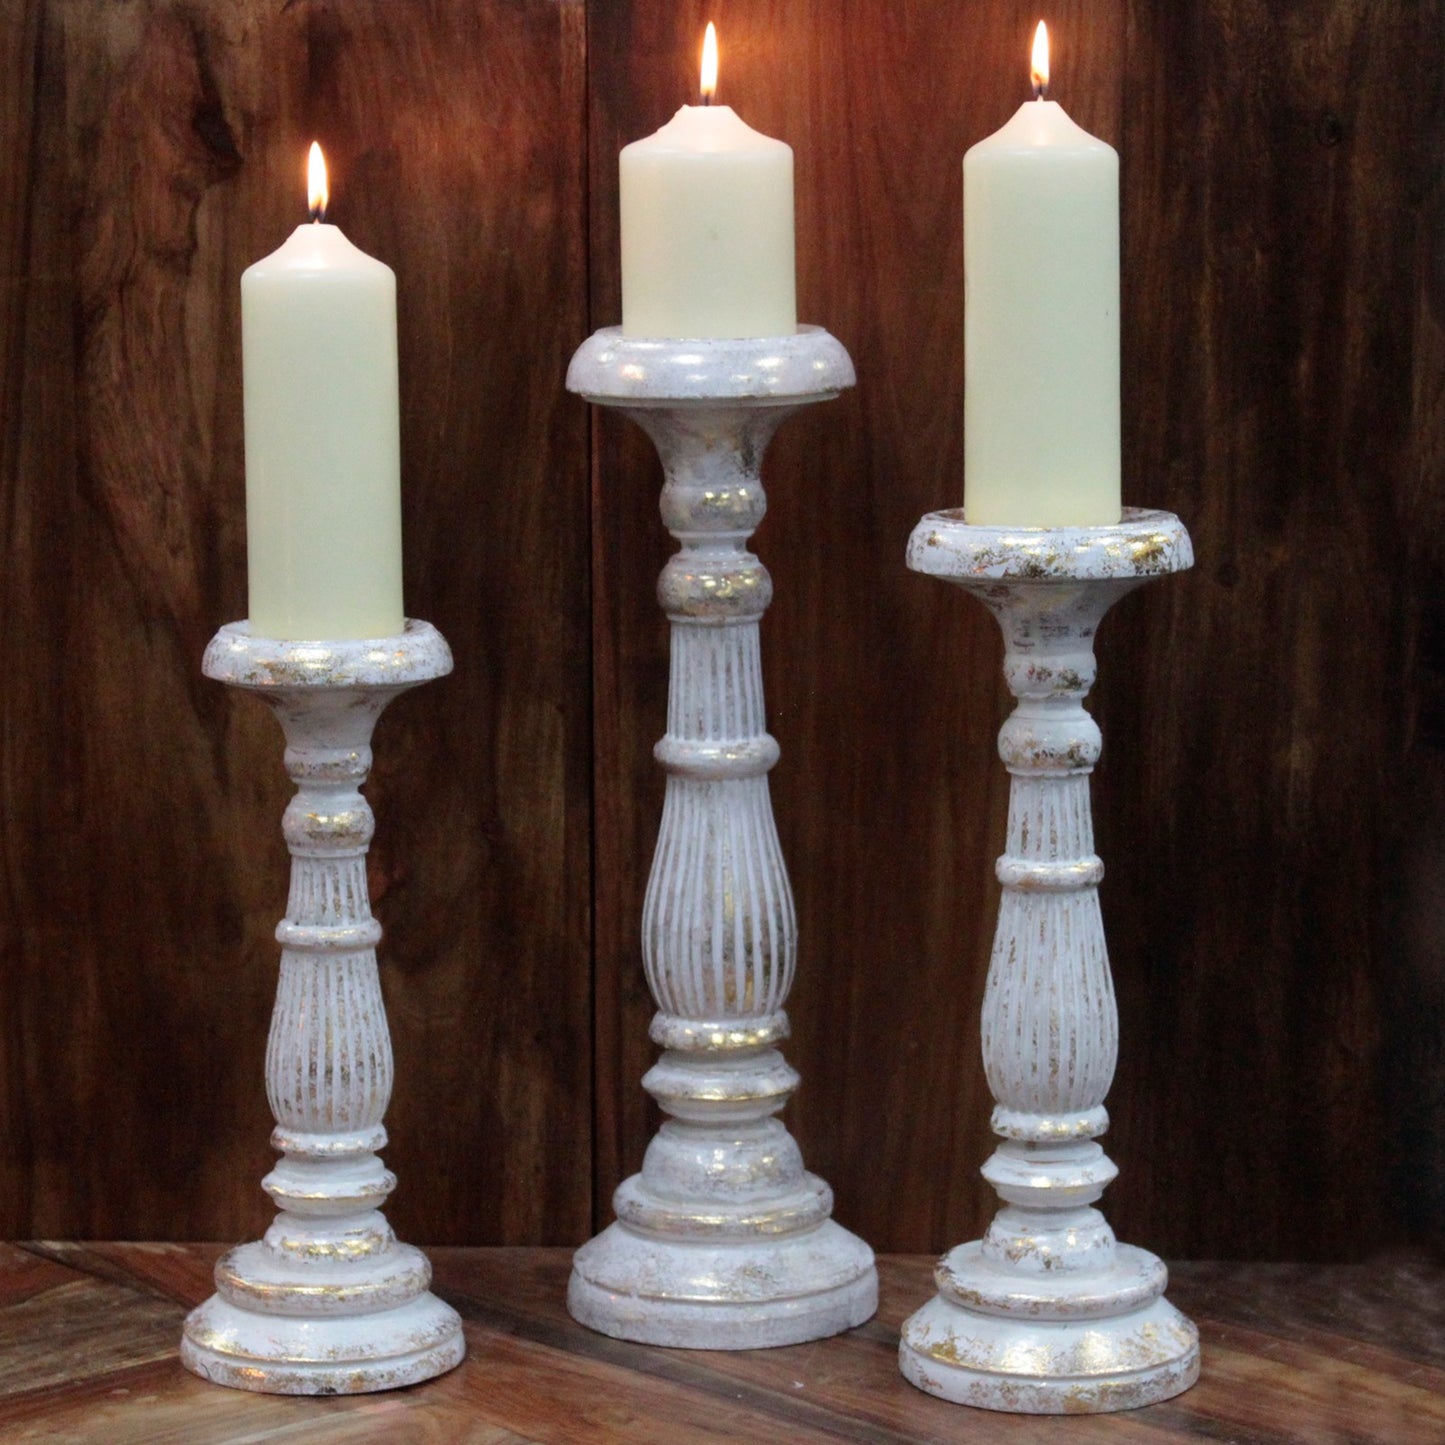 Large Candle Stand - White Gold